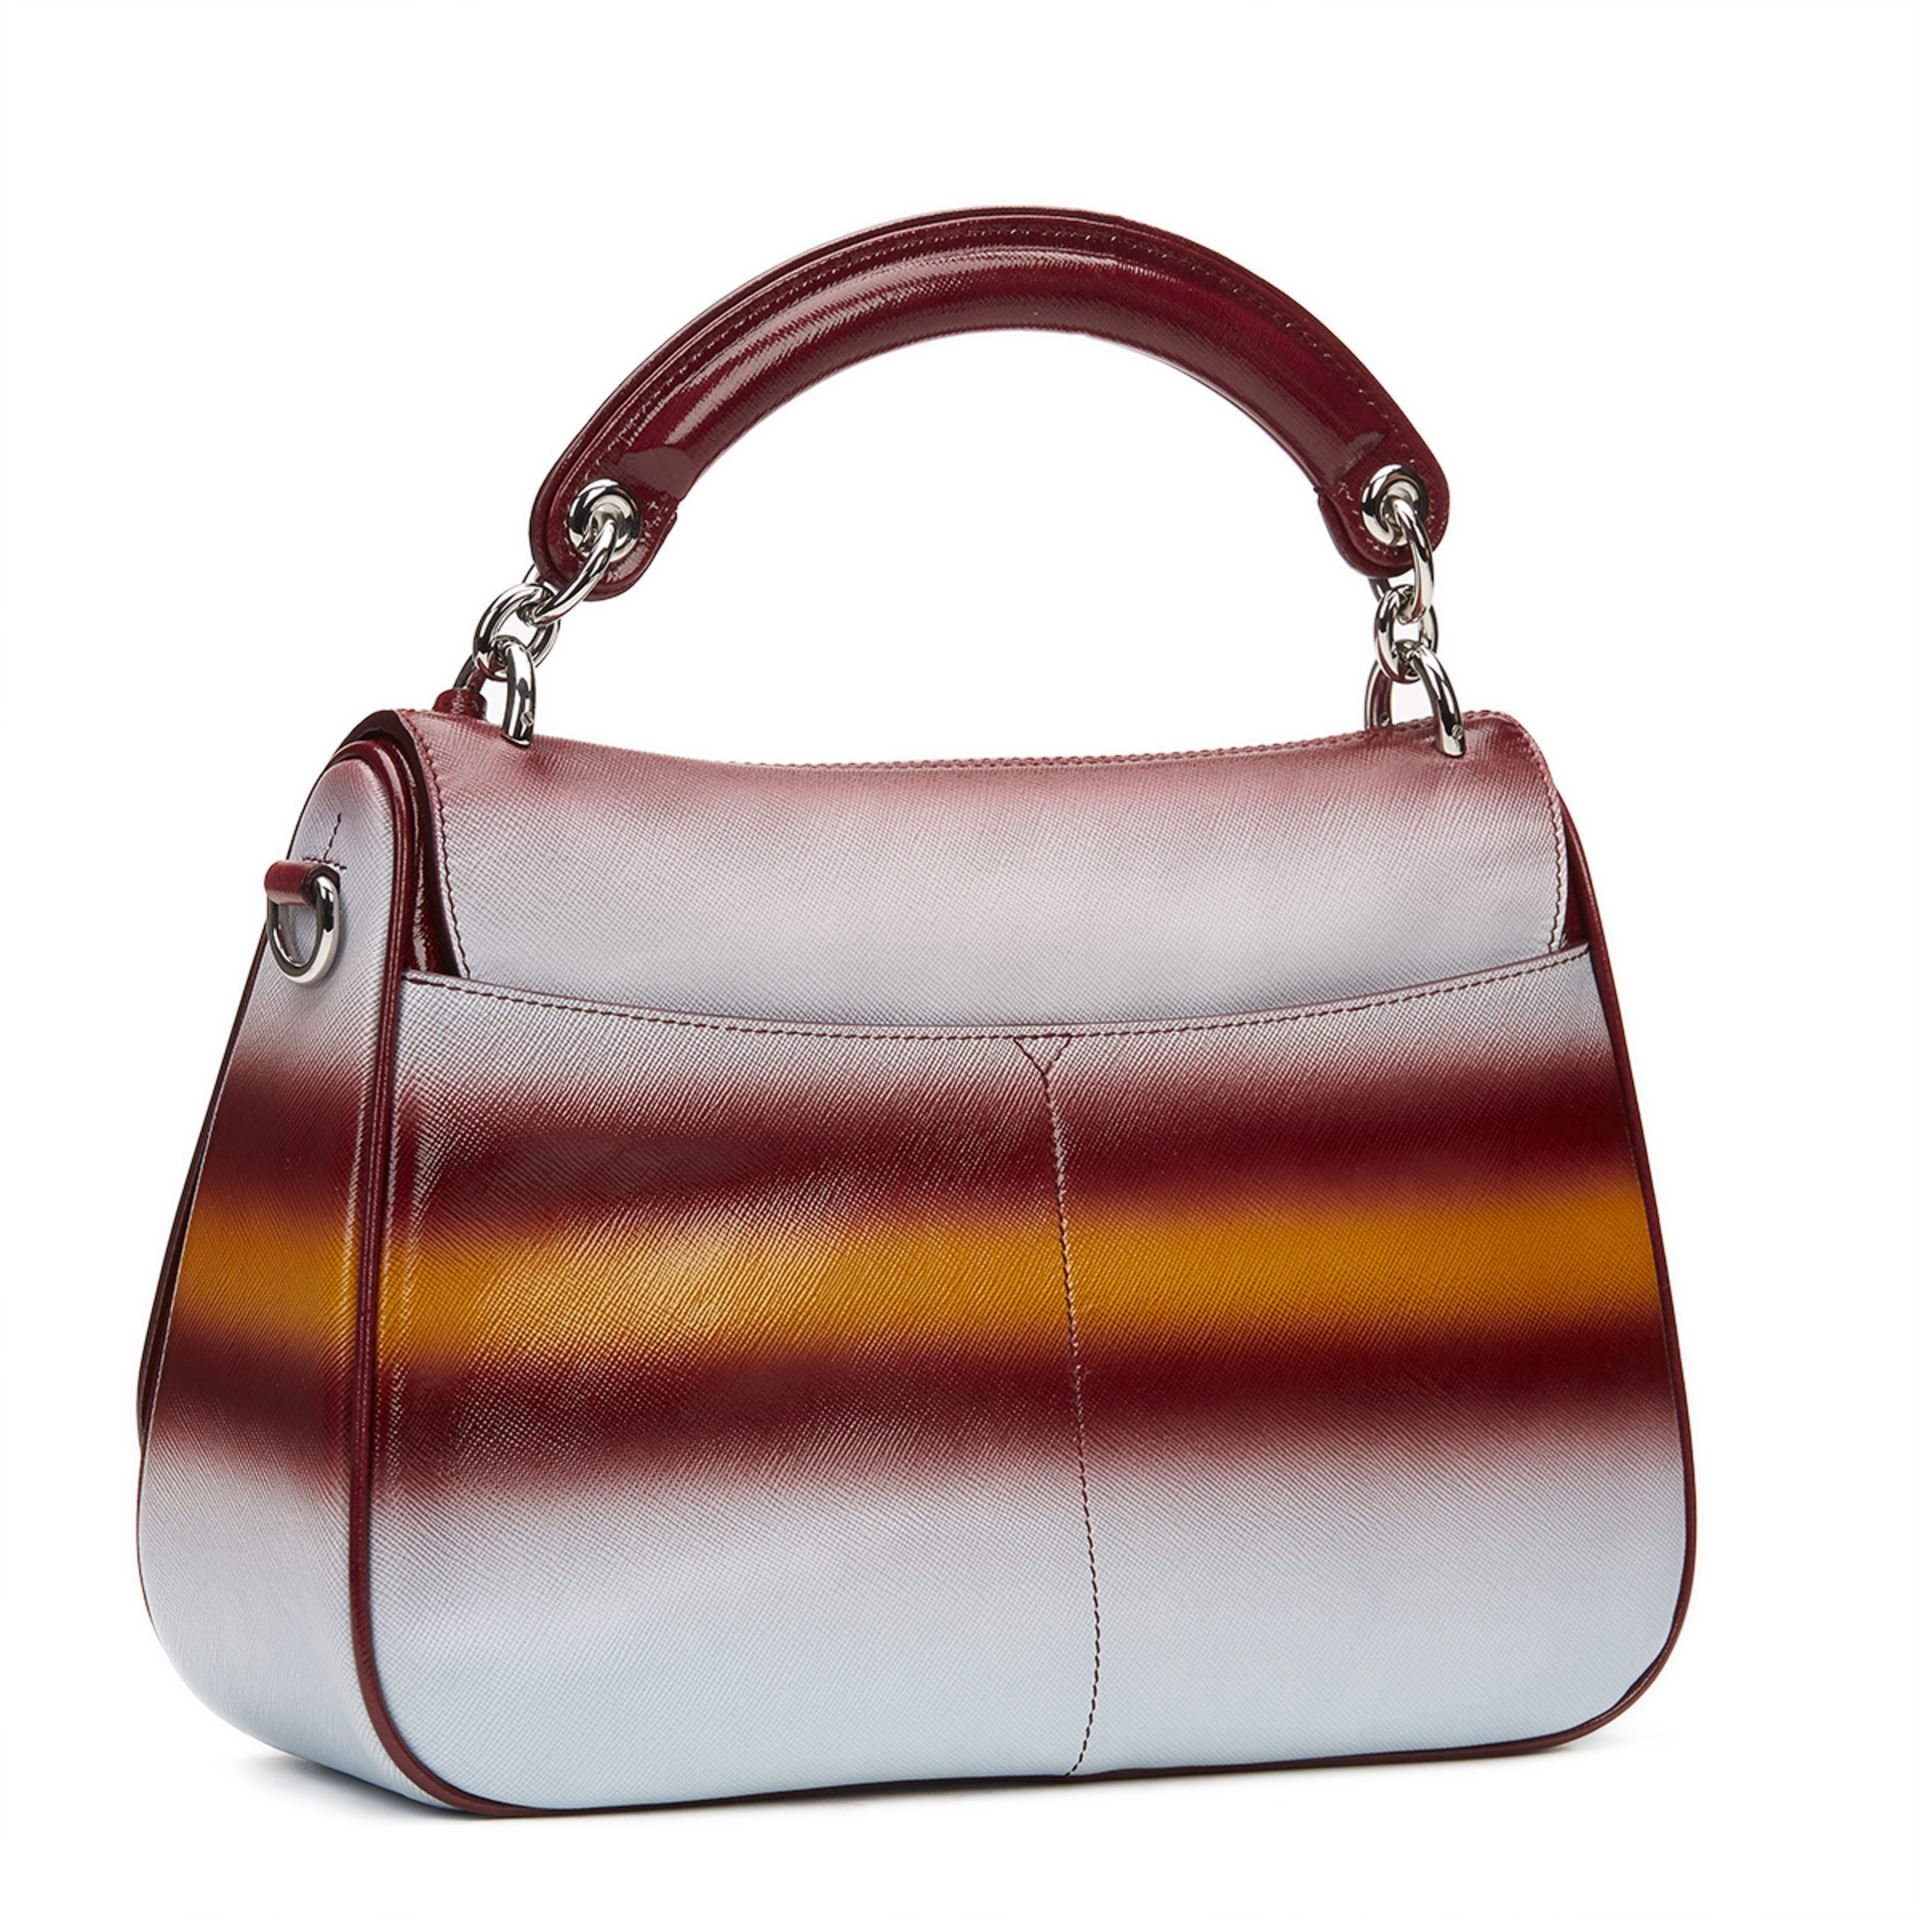 Maroon, Mustard & Blue Gradient Patent Leather Dune Bag - Image 5 of 11